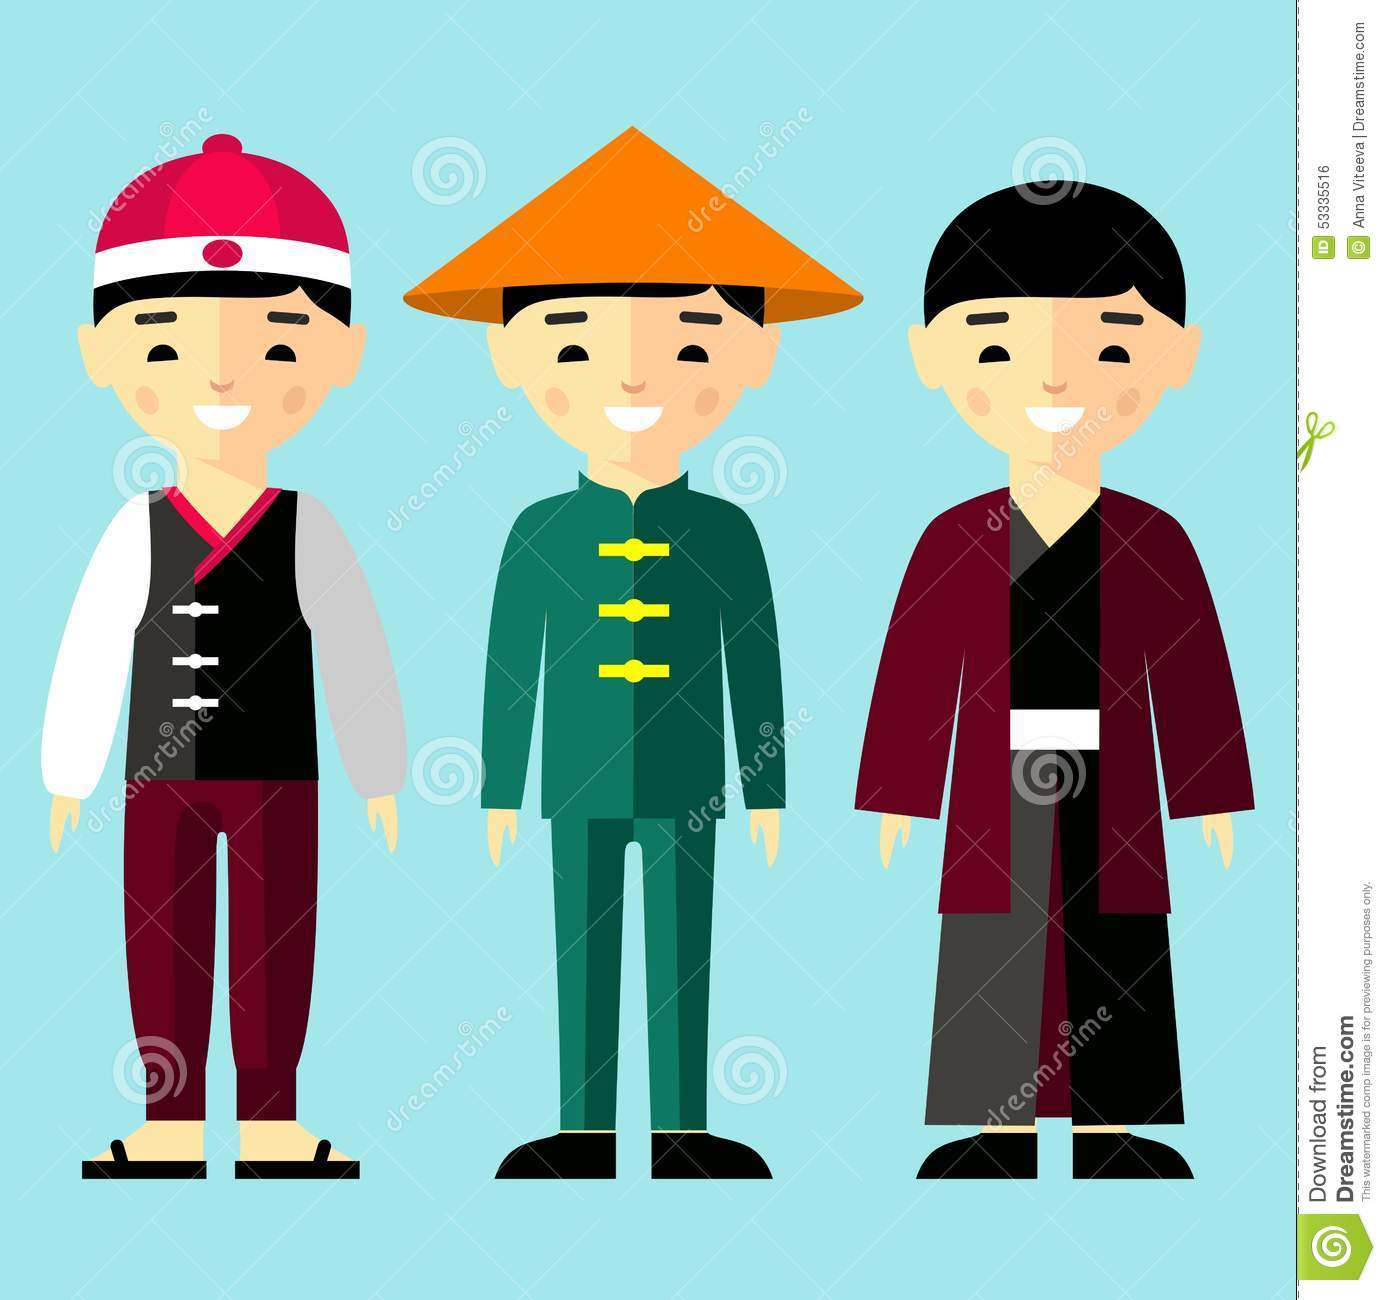 Japanese Clothes clipart #10, Download drawings